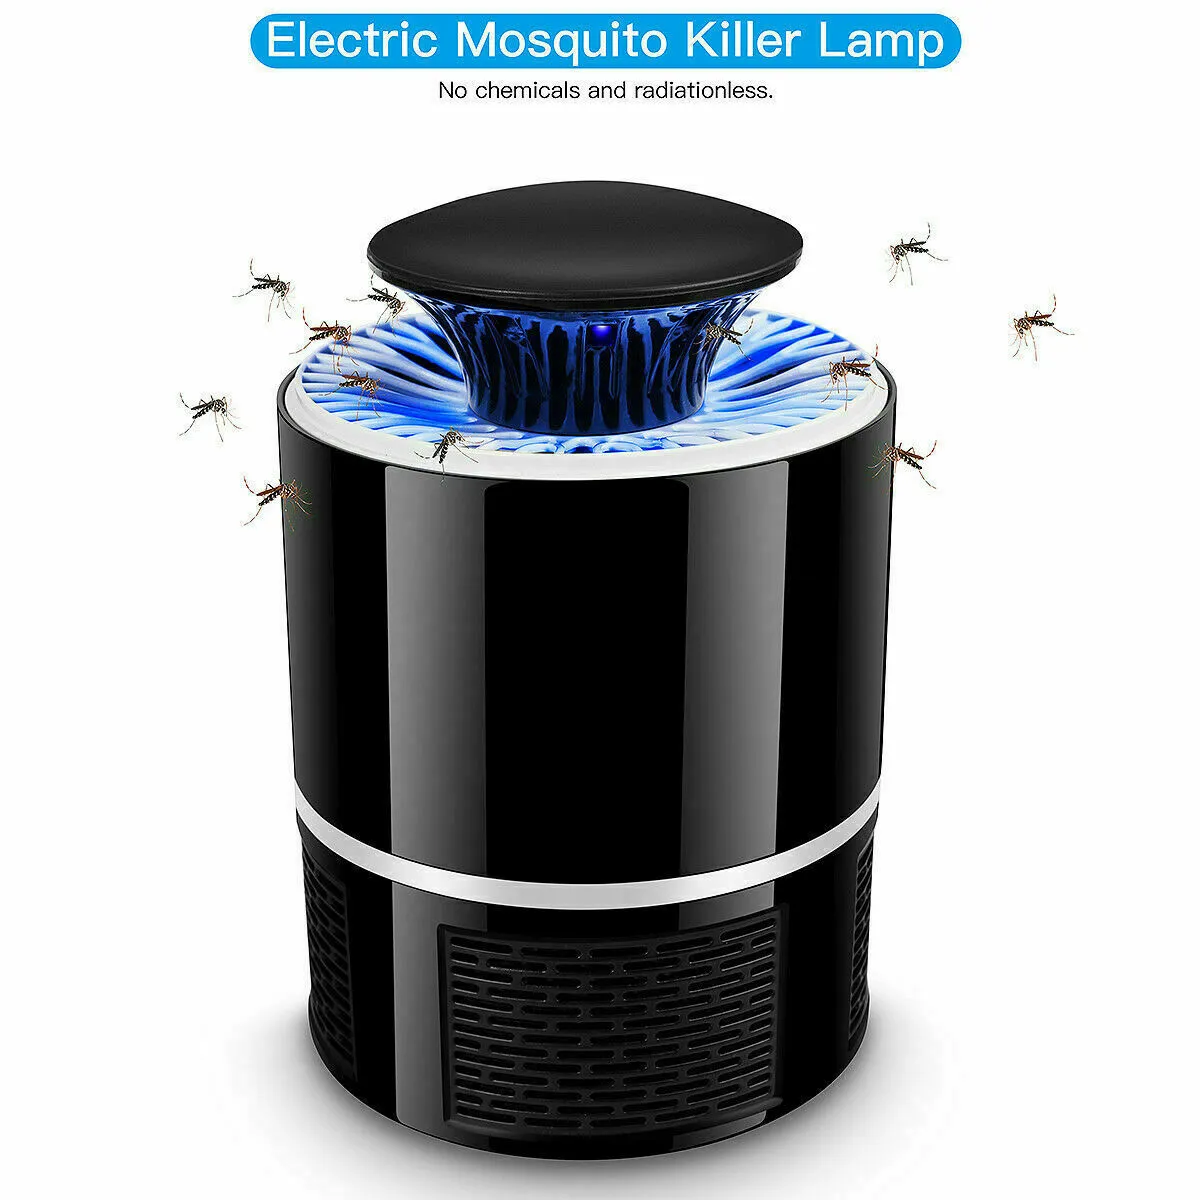 New Electric Fly Bug Mosquito Insect Killer LED Light Trap Control Lamp Pest USB Photocatalyst Lampada repellente zanzare Repellente zanzare